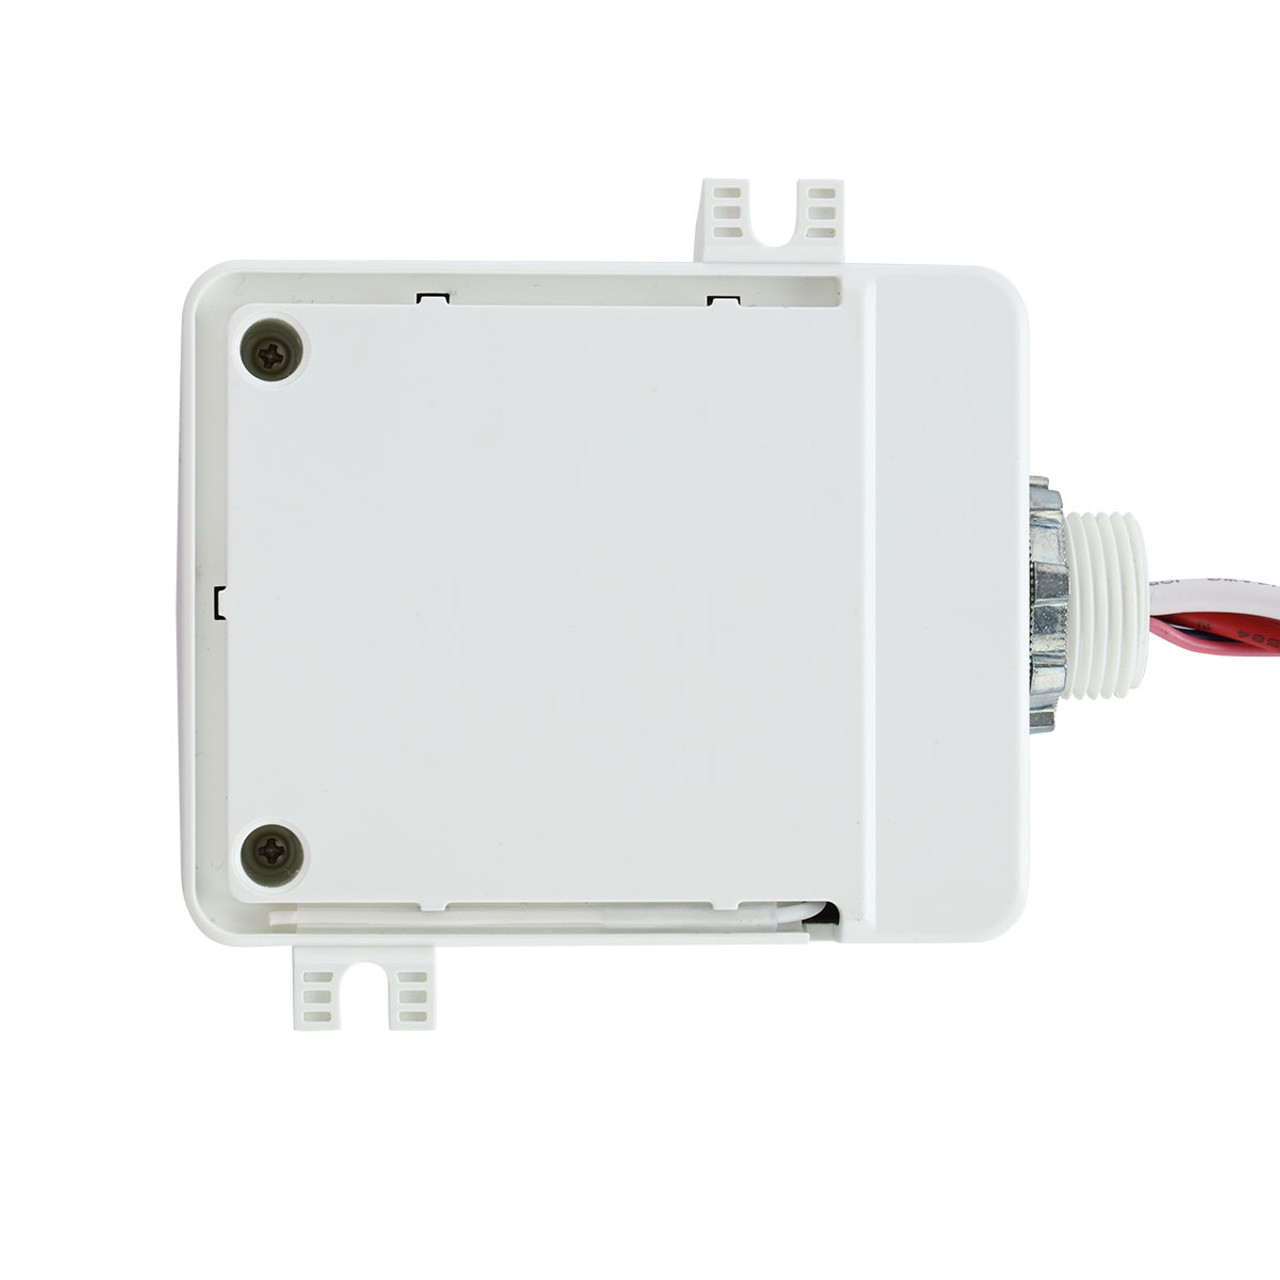 Bluetooth Zone Controller, 20A, 120-277V, 0-10V output, Sink Current 48.5mA (PPA104S.A0) Back